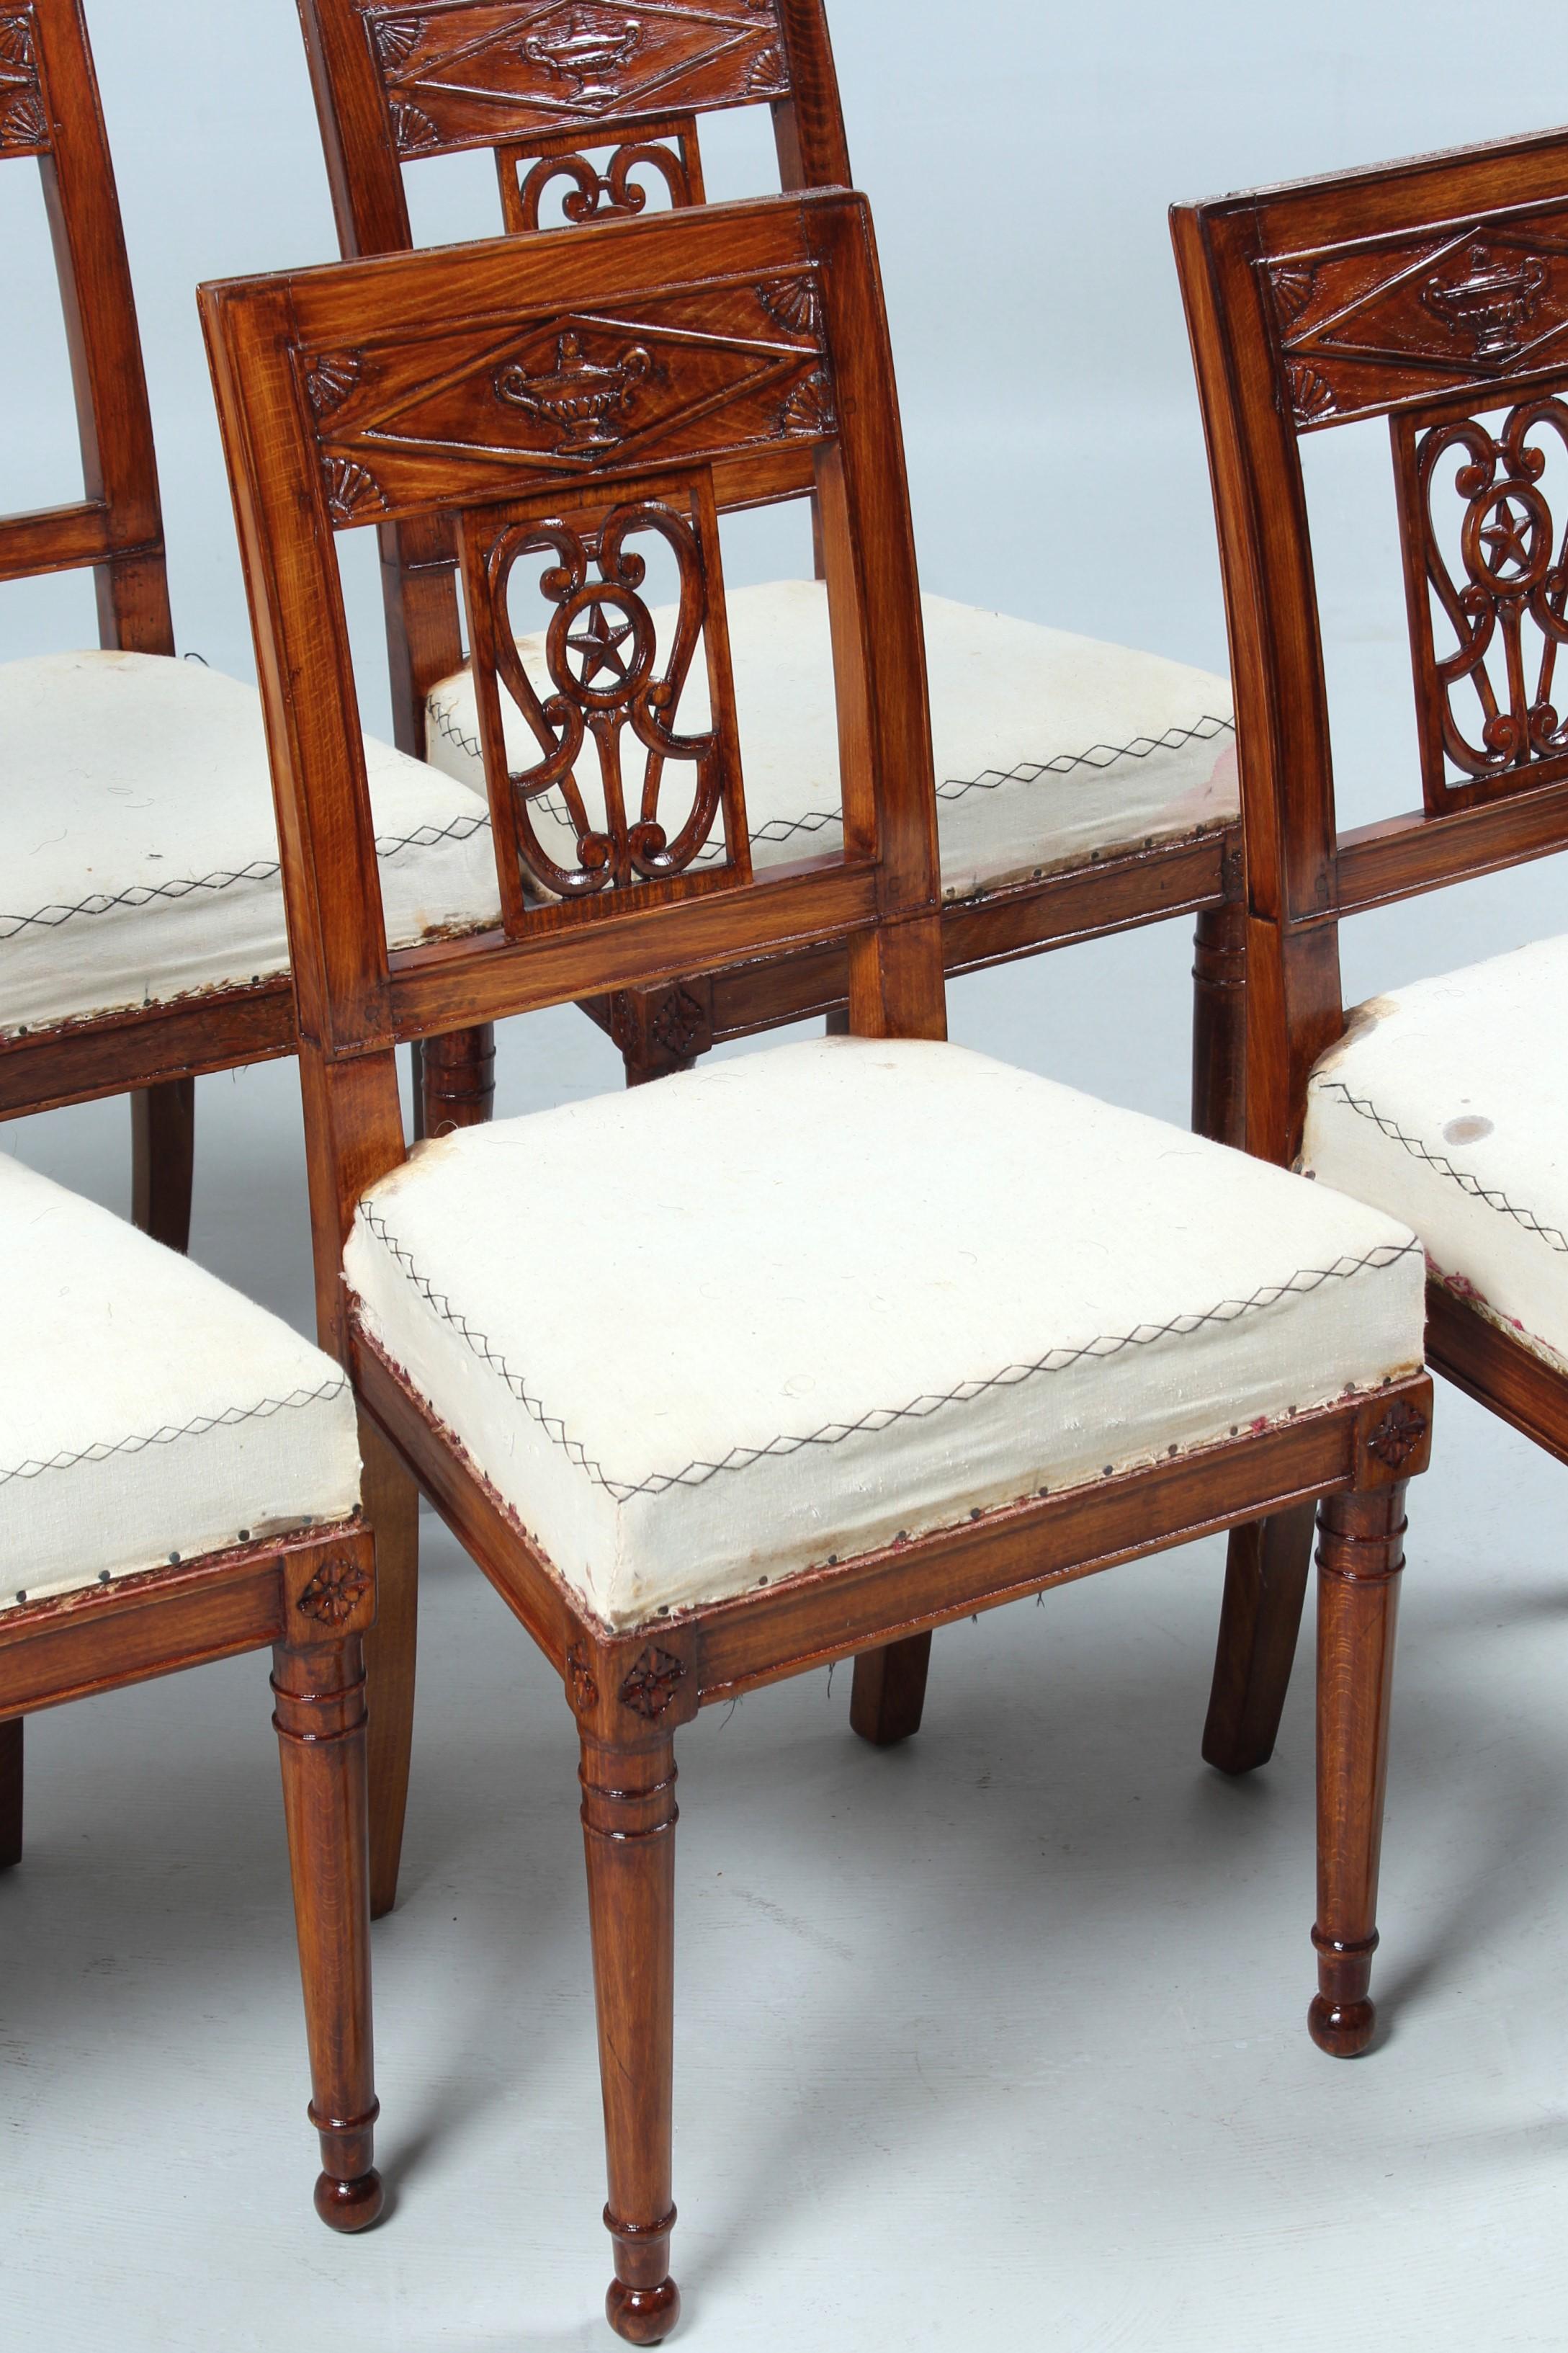 Six identical antique chairs

France
Beech
Directoire around 1800

Dimensions: H x W x D: 87 x 45 x 41 cm, seat height: 46 cm

Description:
Beautiful set of provincial French chairs with typical Directoire decoration.
The round legs at the front end